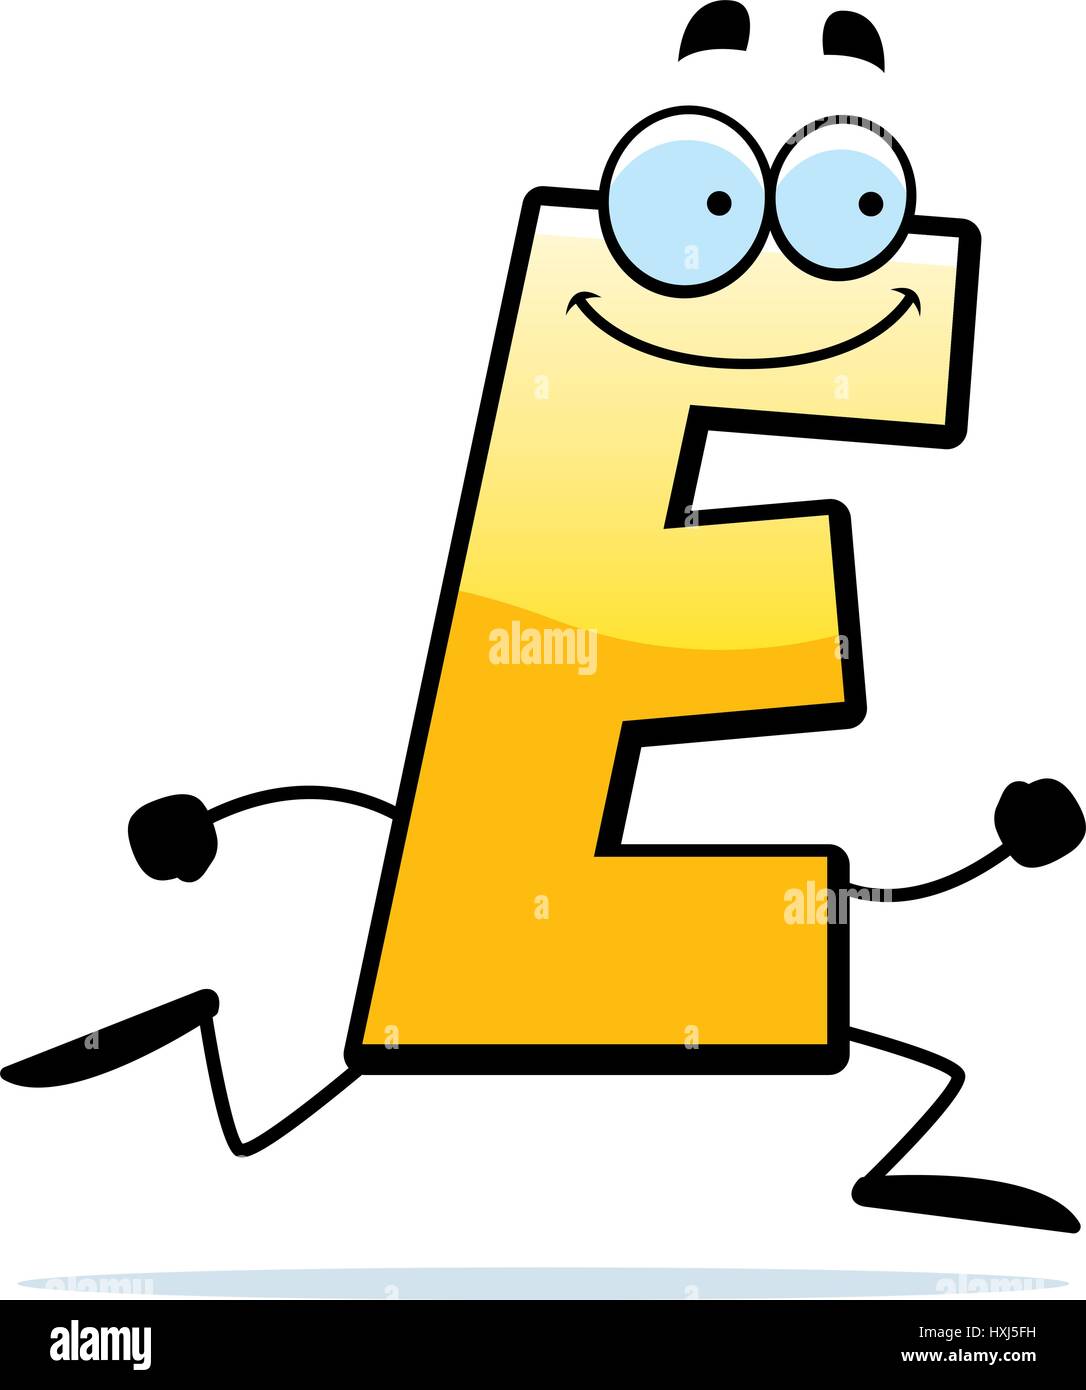 A cartoon illustration of a letter E running and smiling. Stock Vector